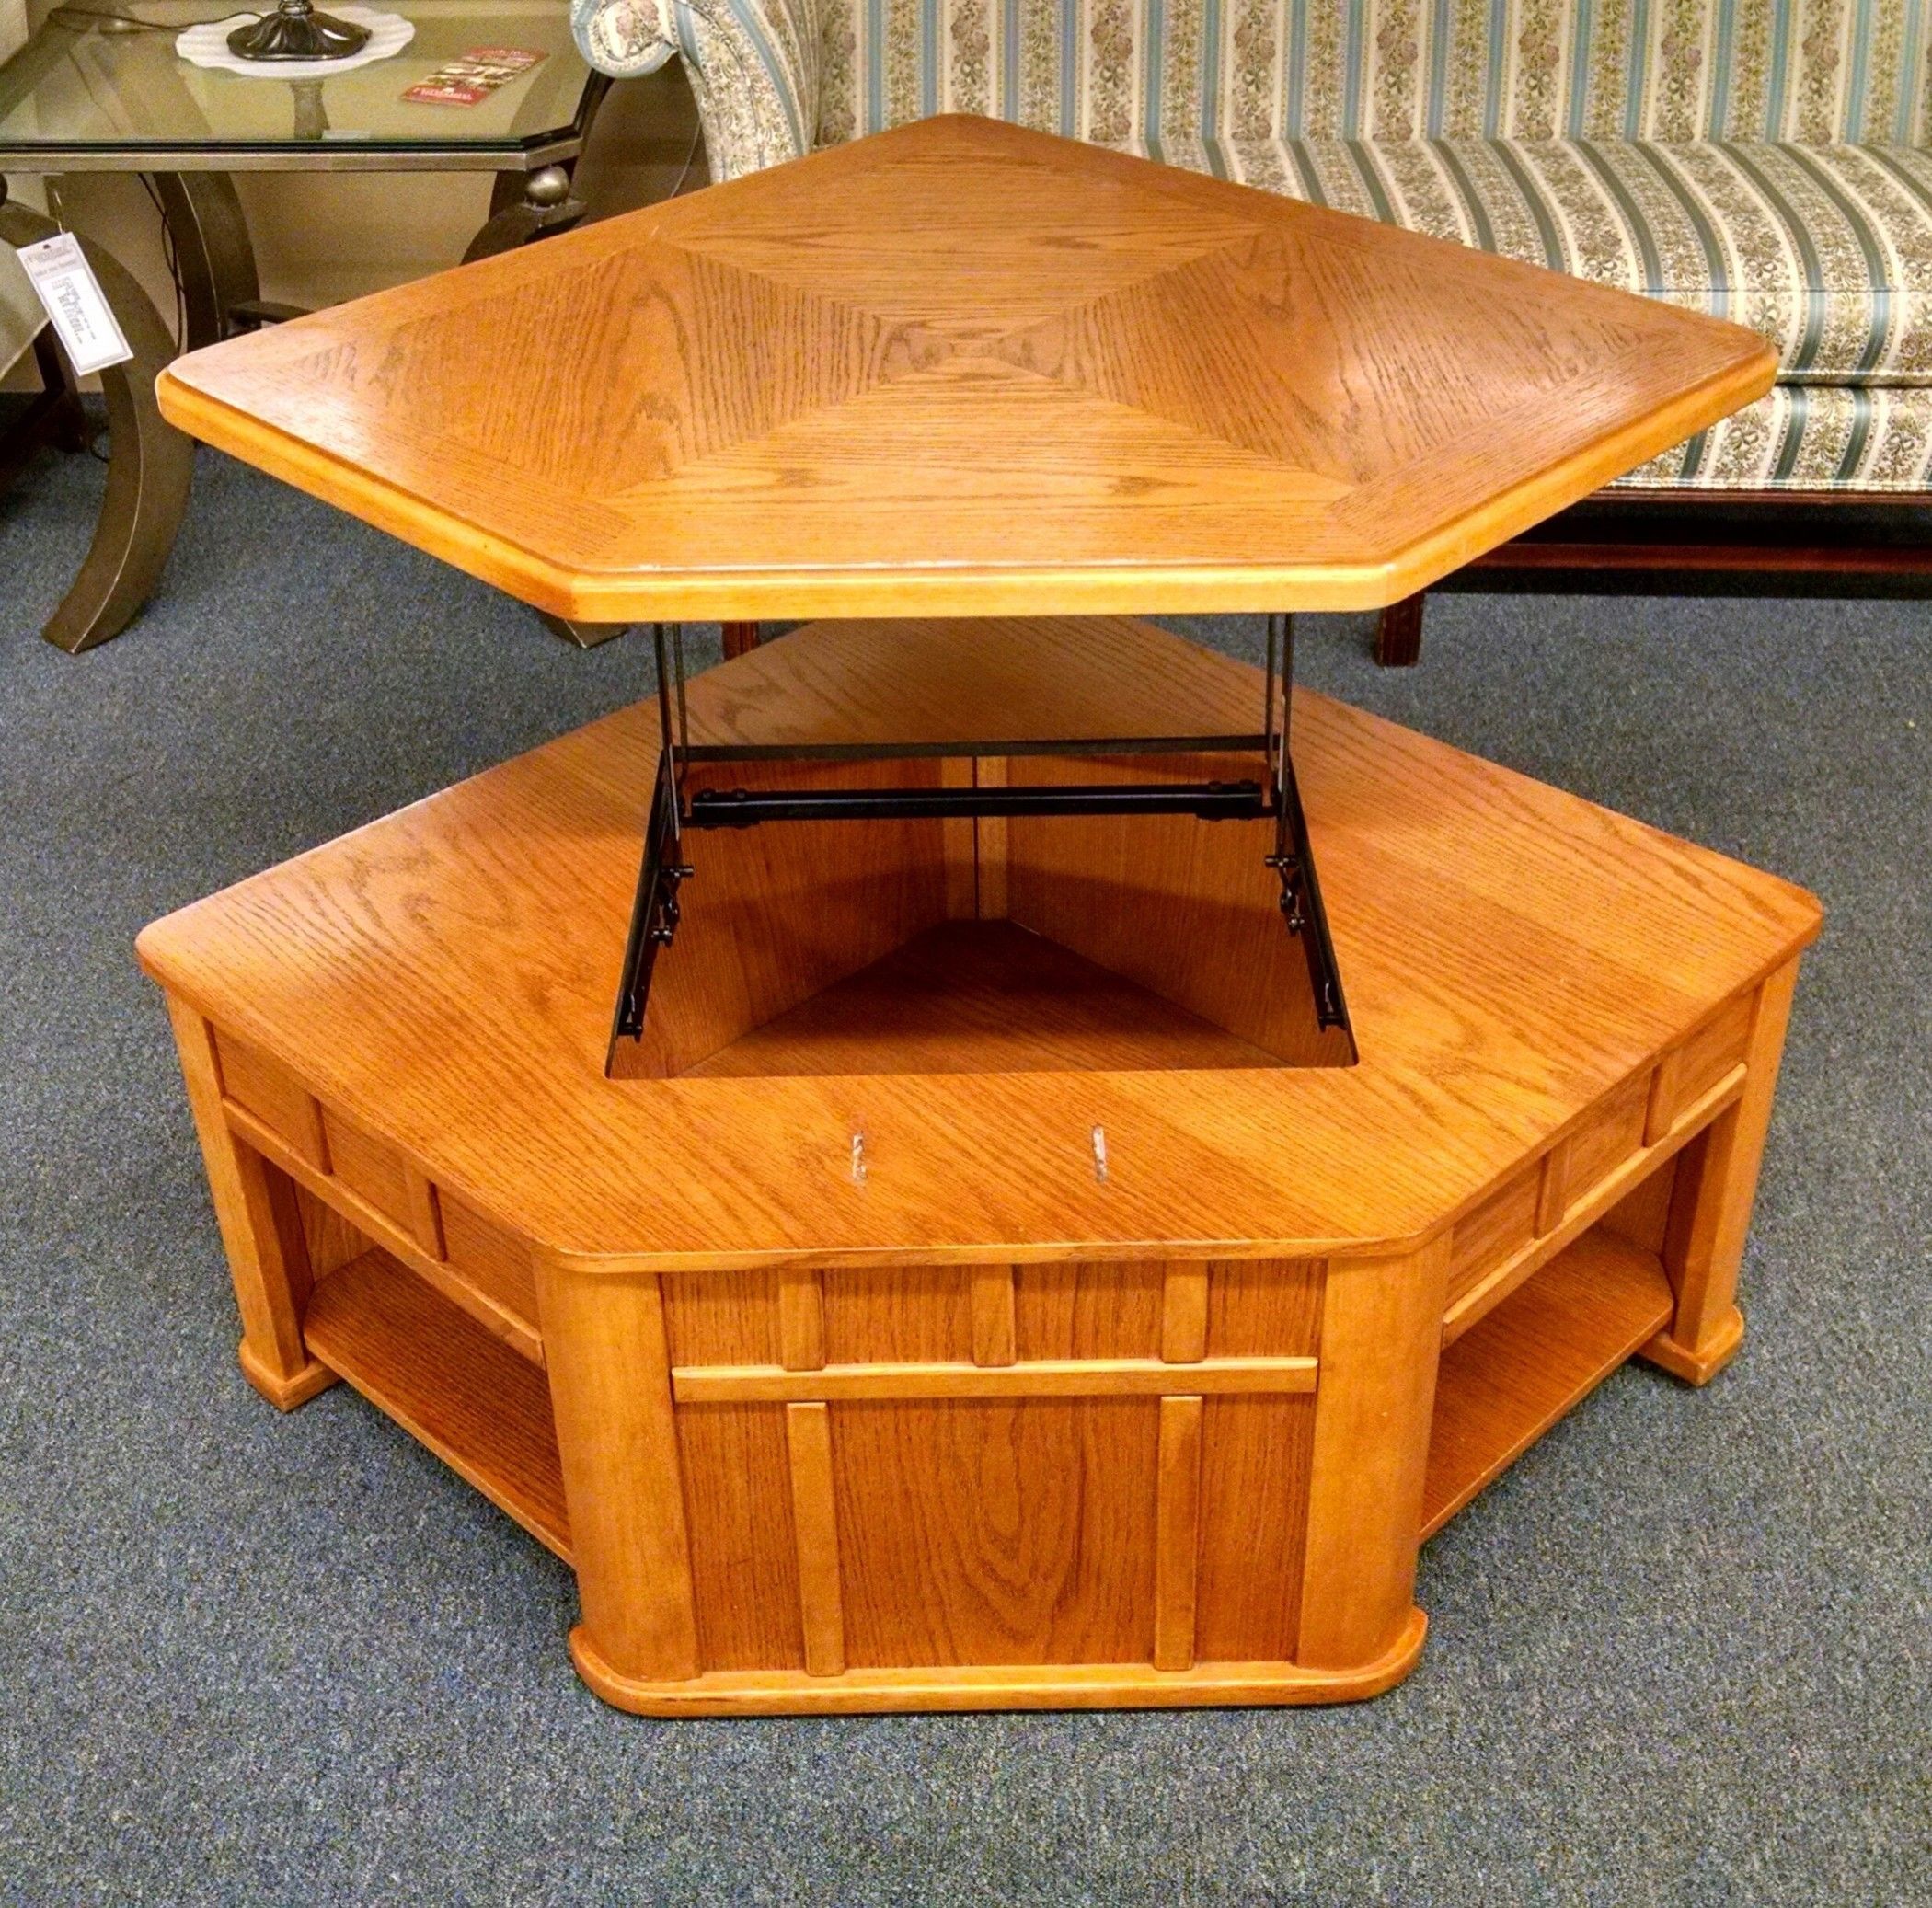 Oak Lift Top Coffee Table | Delmarva Furniture Consignment Intended For Wood Lift Top Coffee Tables (Gallery 2 of 20)